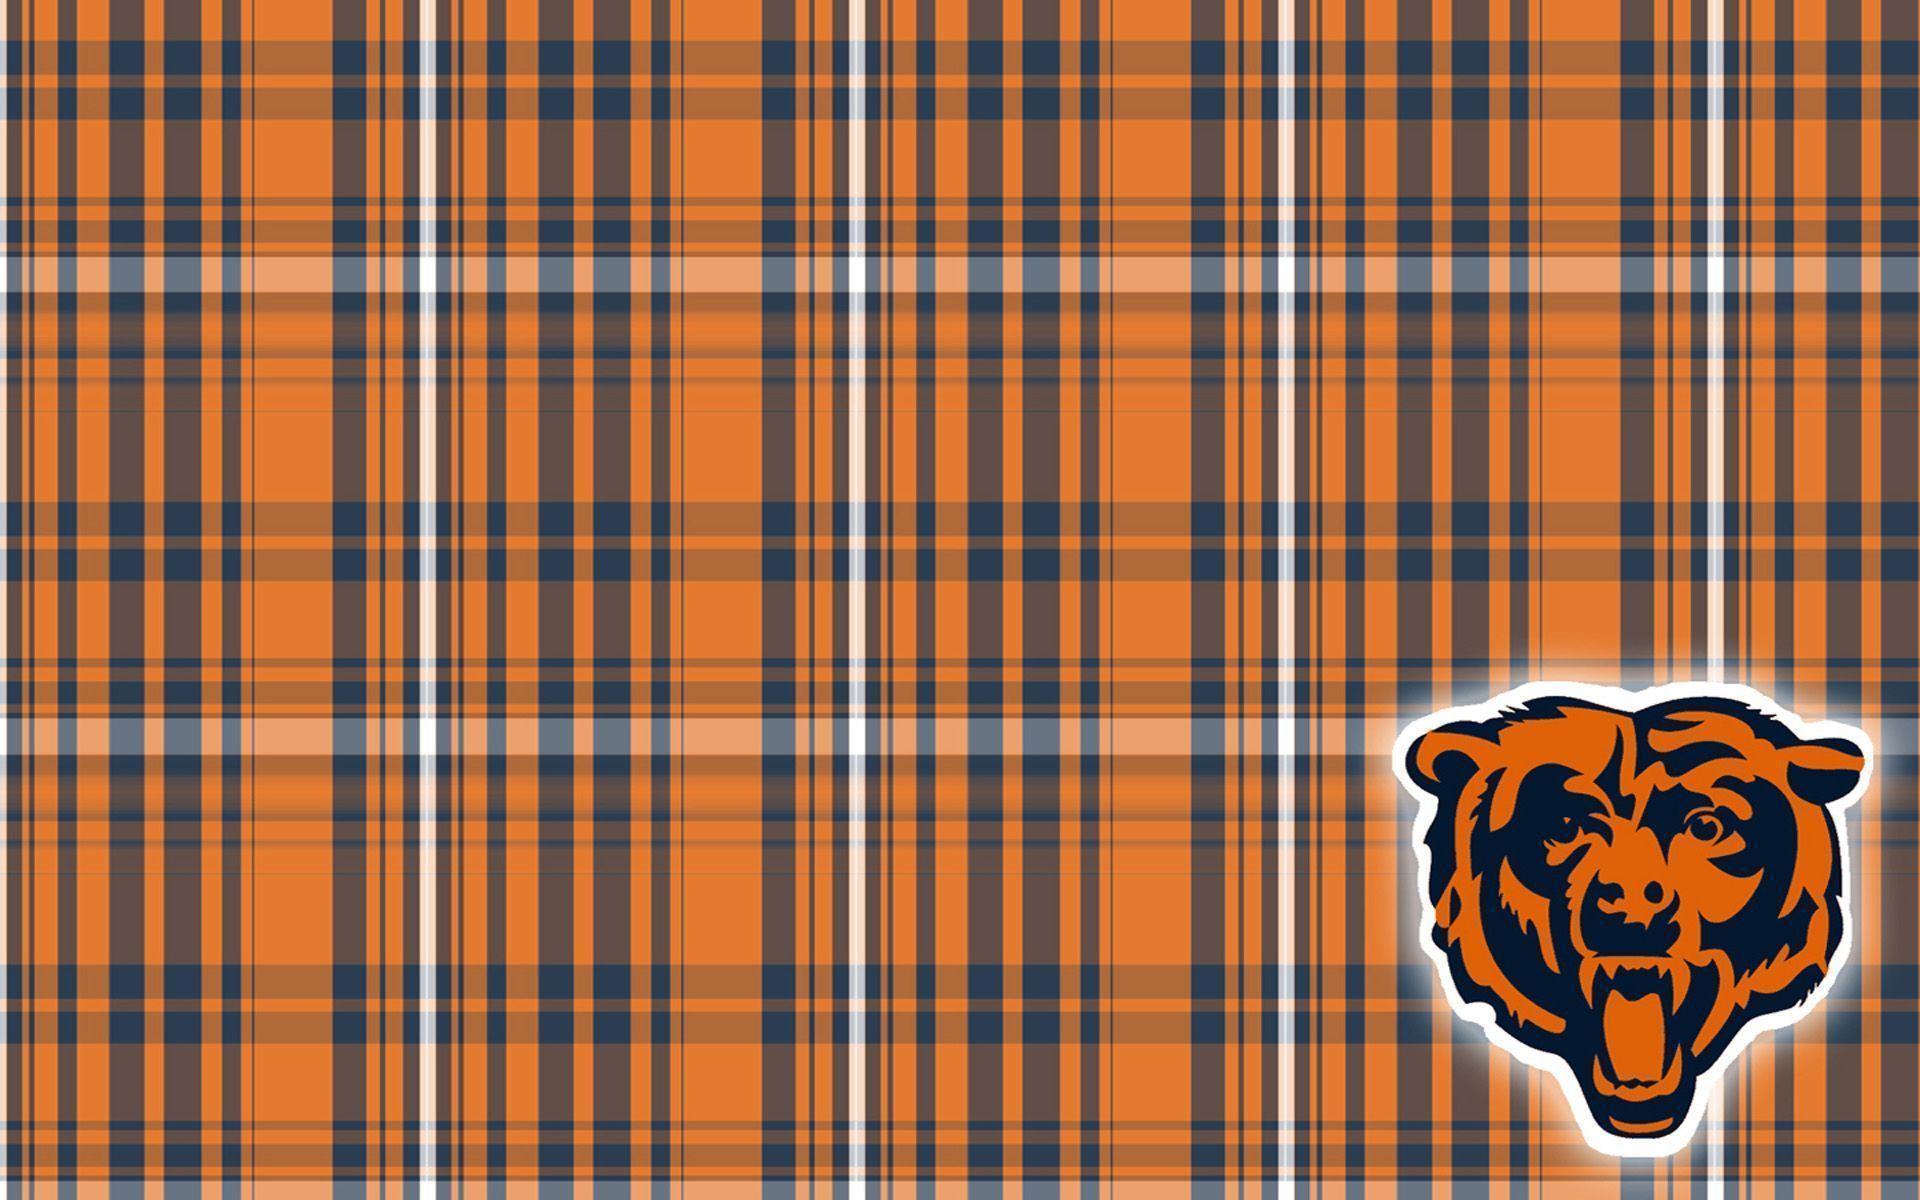 Enjoy this Chicago Bears background. Chicago Bears wallpaper